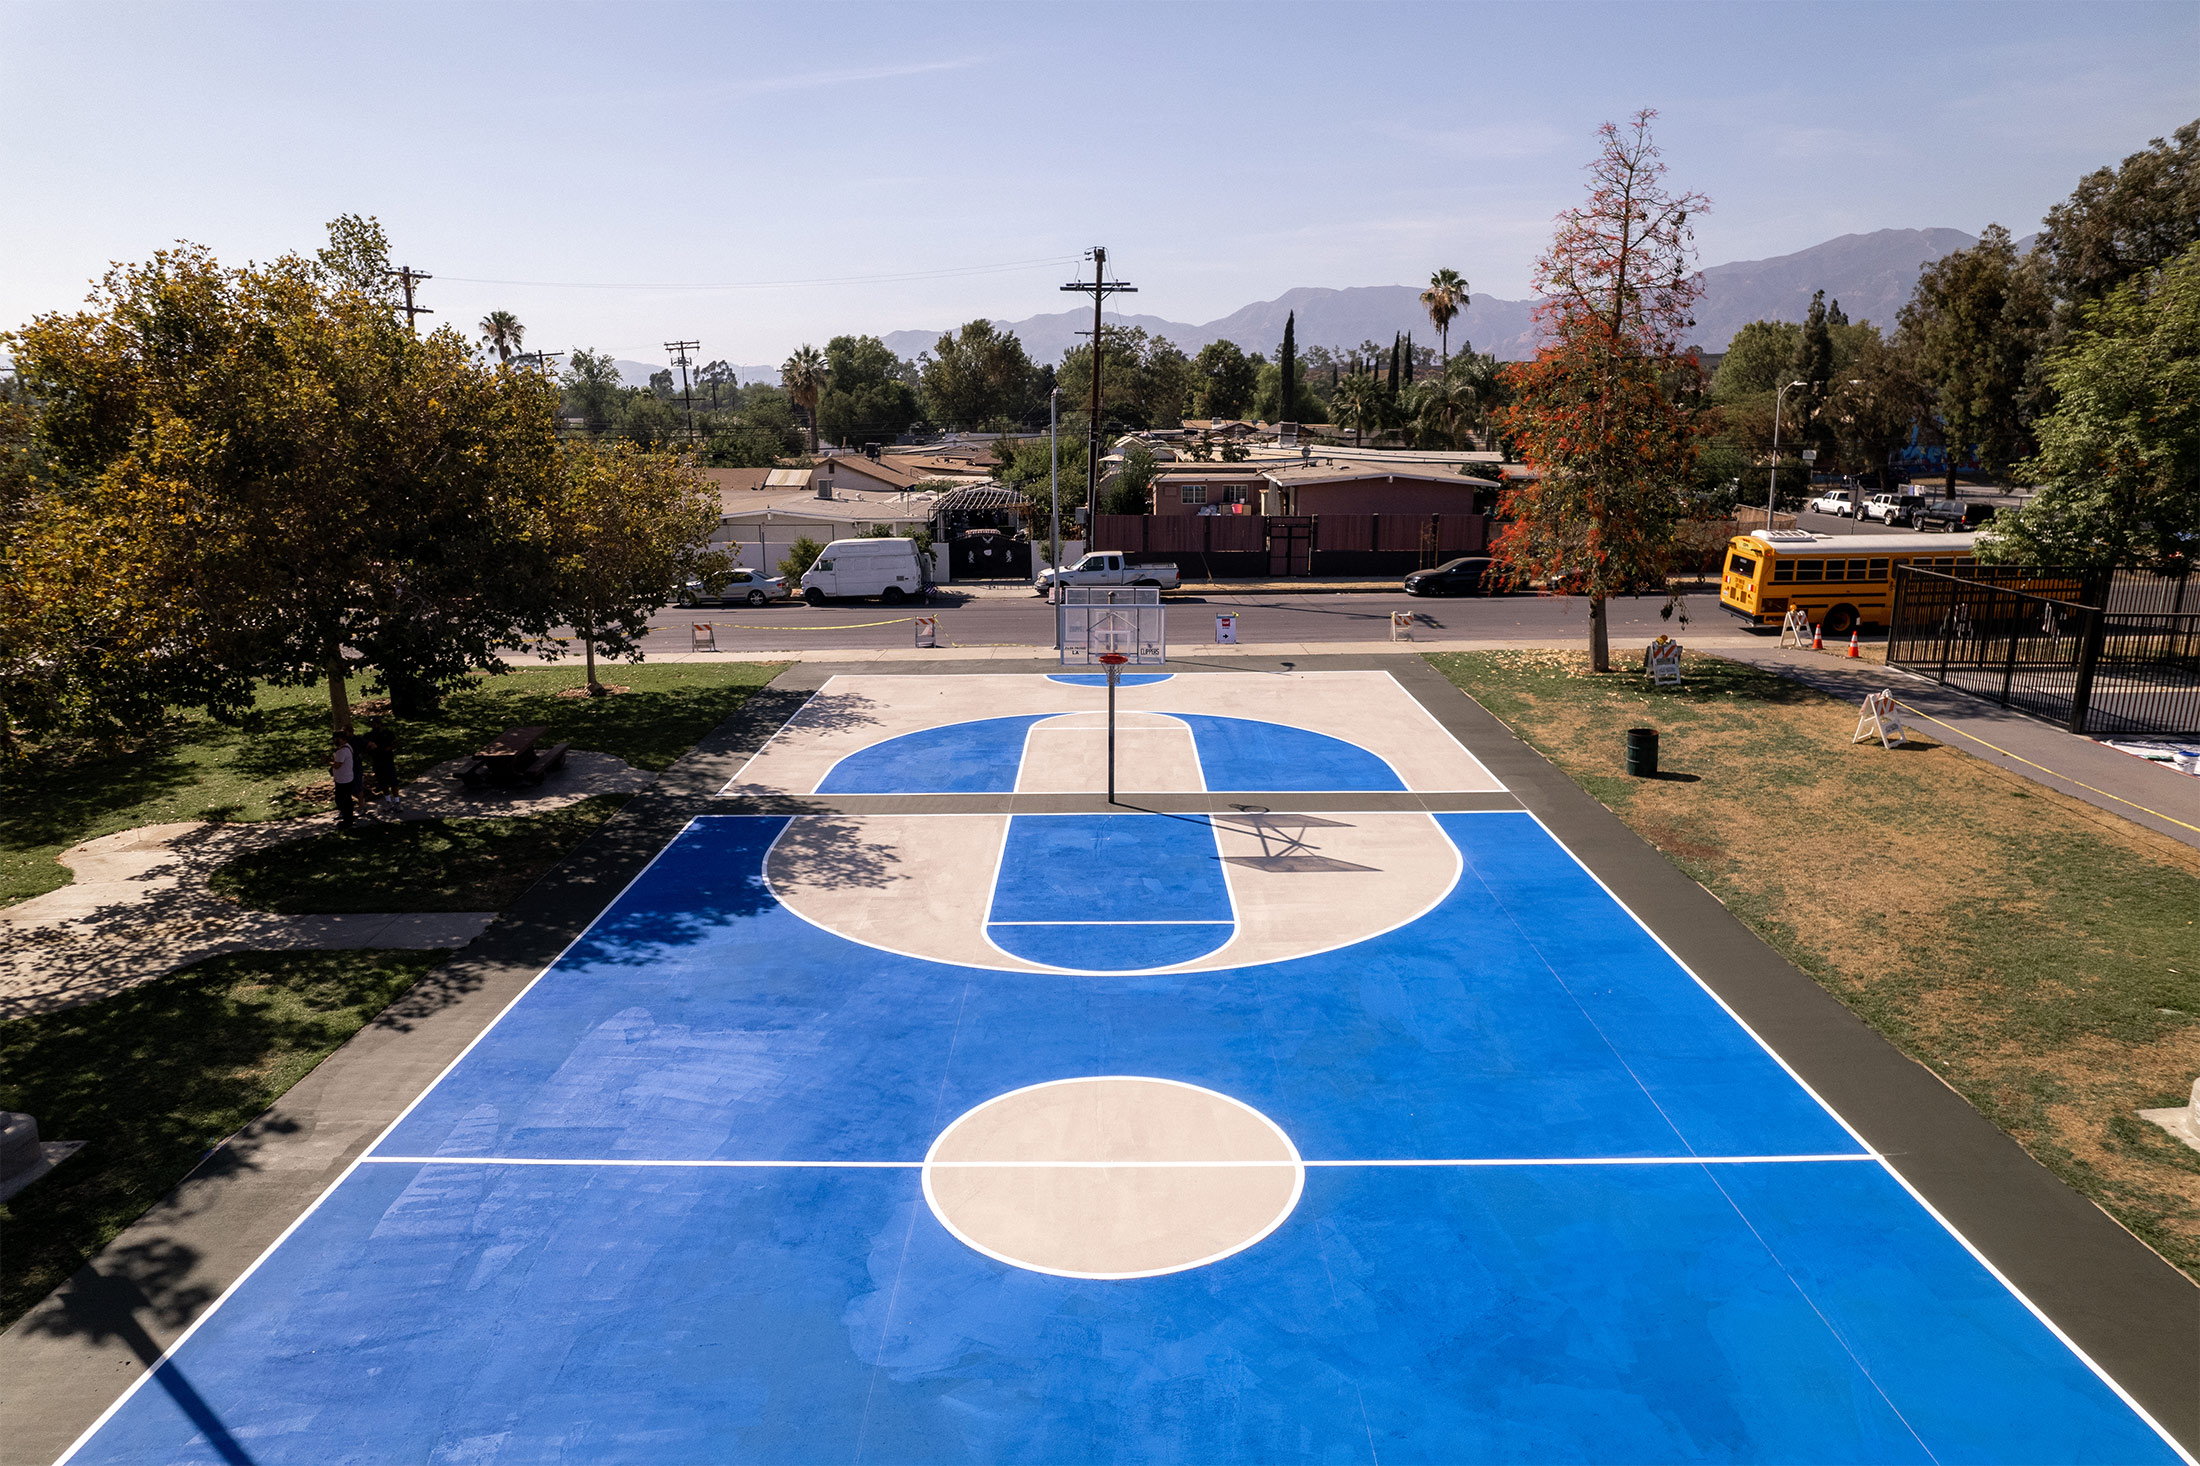 London basketball court co-designed with local residents - ICON